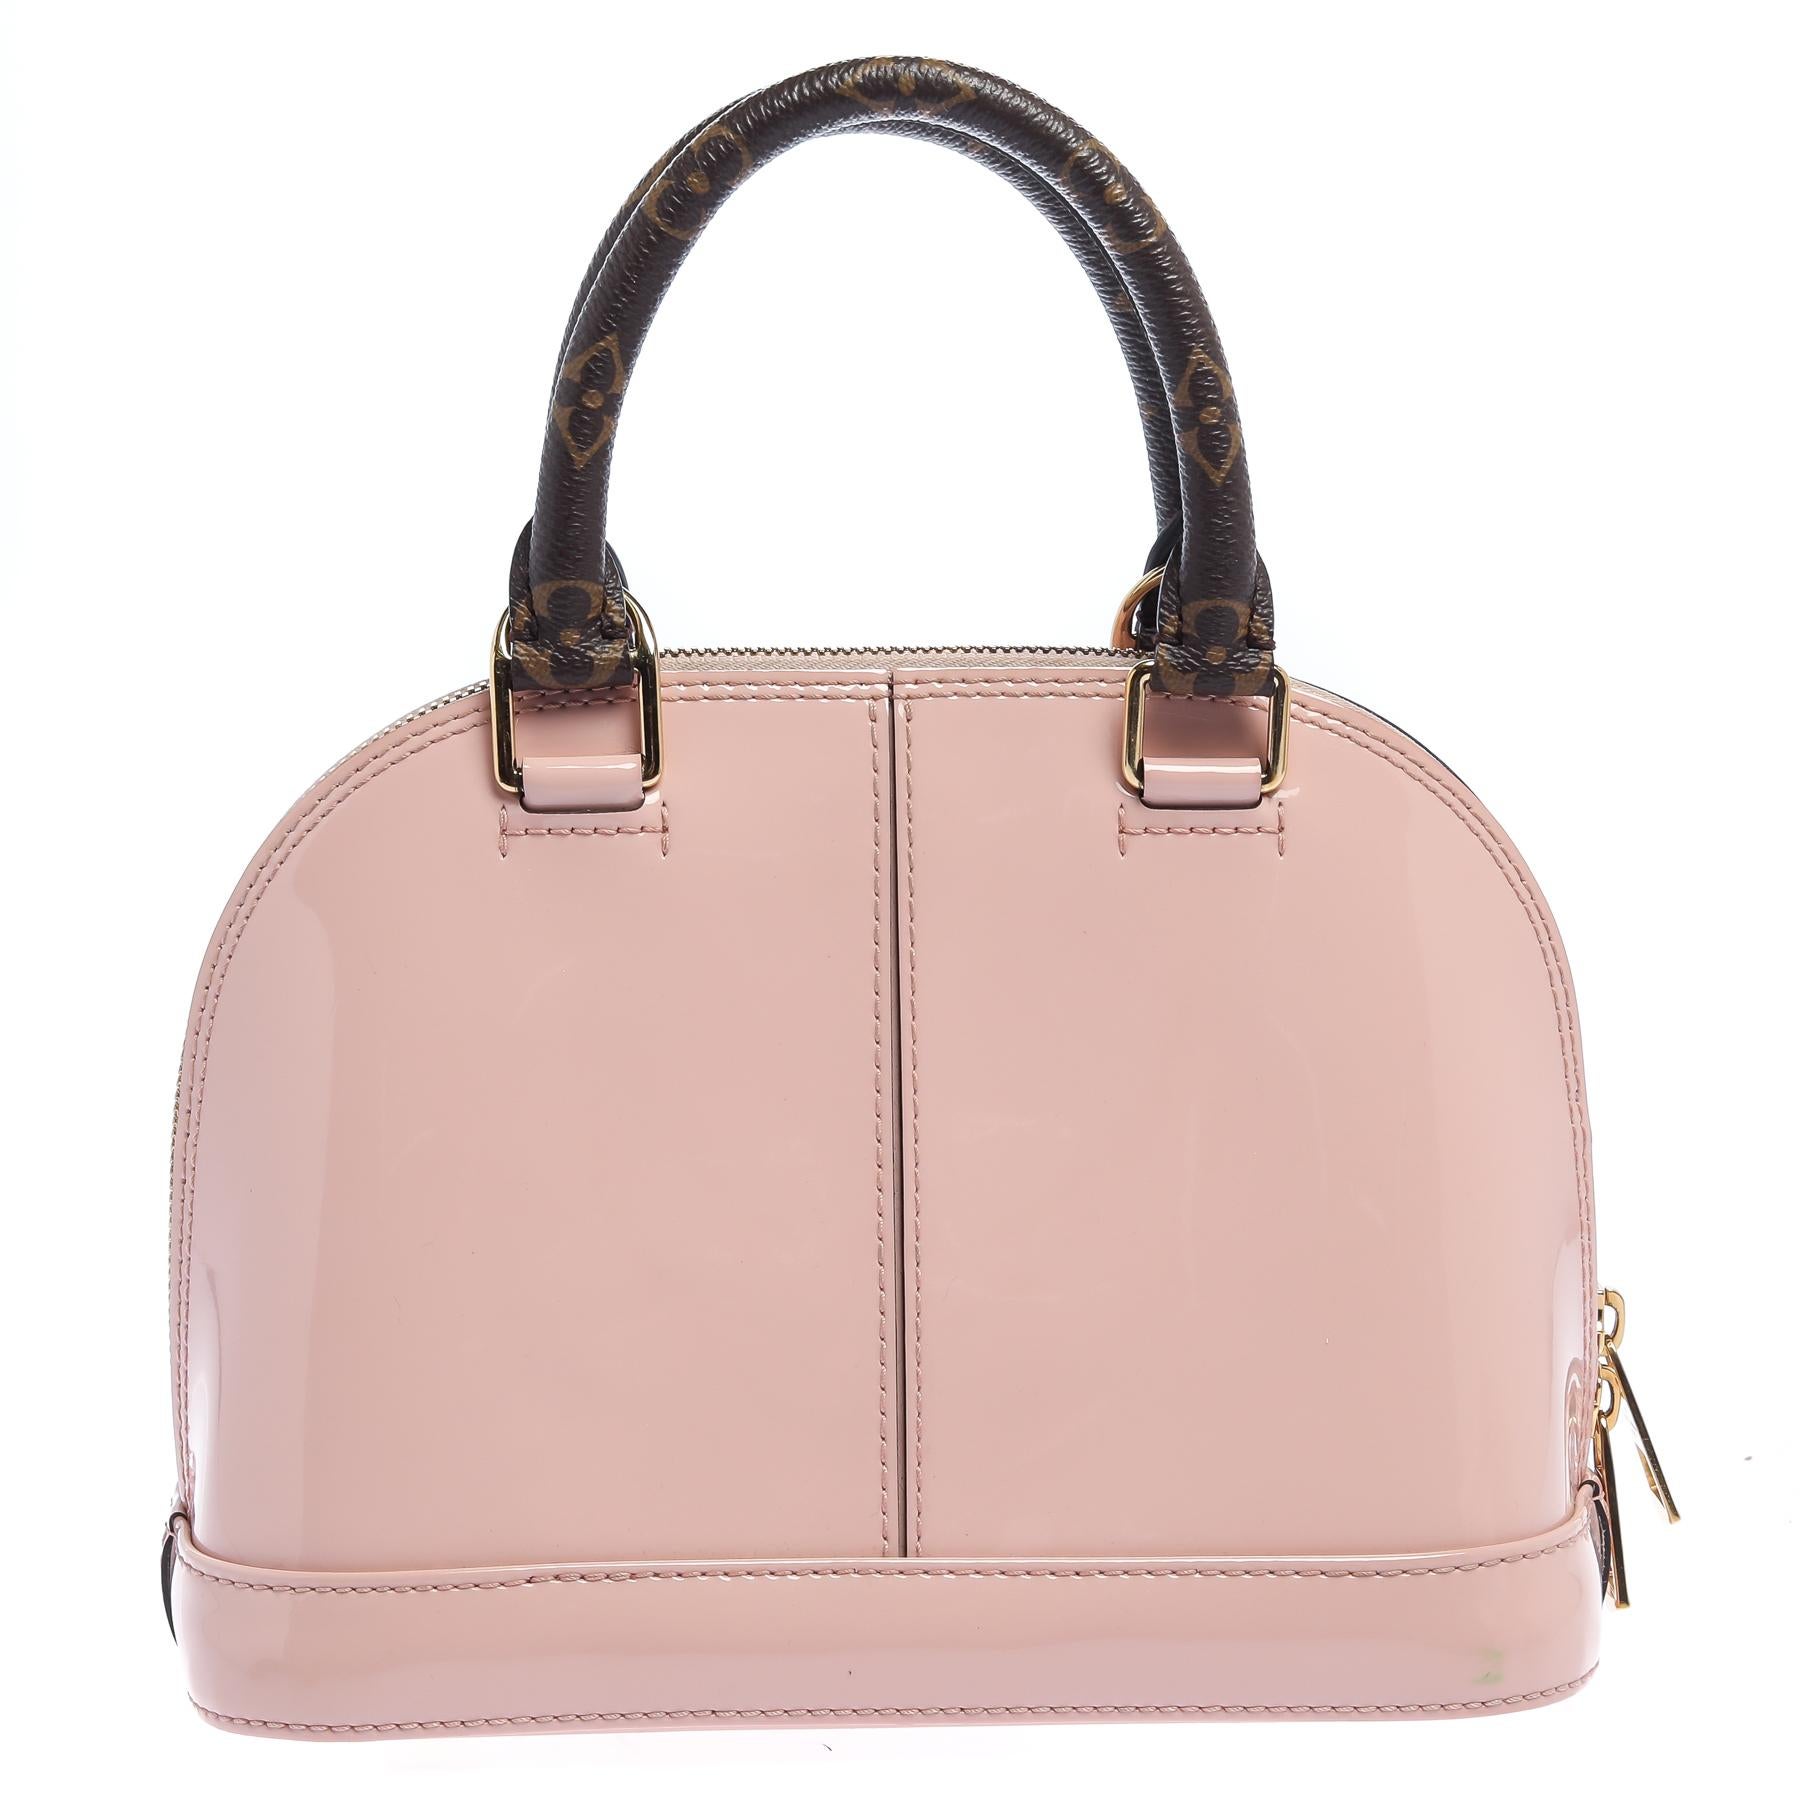 Out of all the irresistible handbags from Louis Vuitton, the Alma is the most structured one. First introduced in 1934 by Gaston-Louis Vuitton, the Alma is a classic that has received love from icons. This piece comes crafted from pink patent